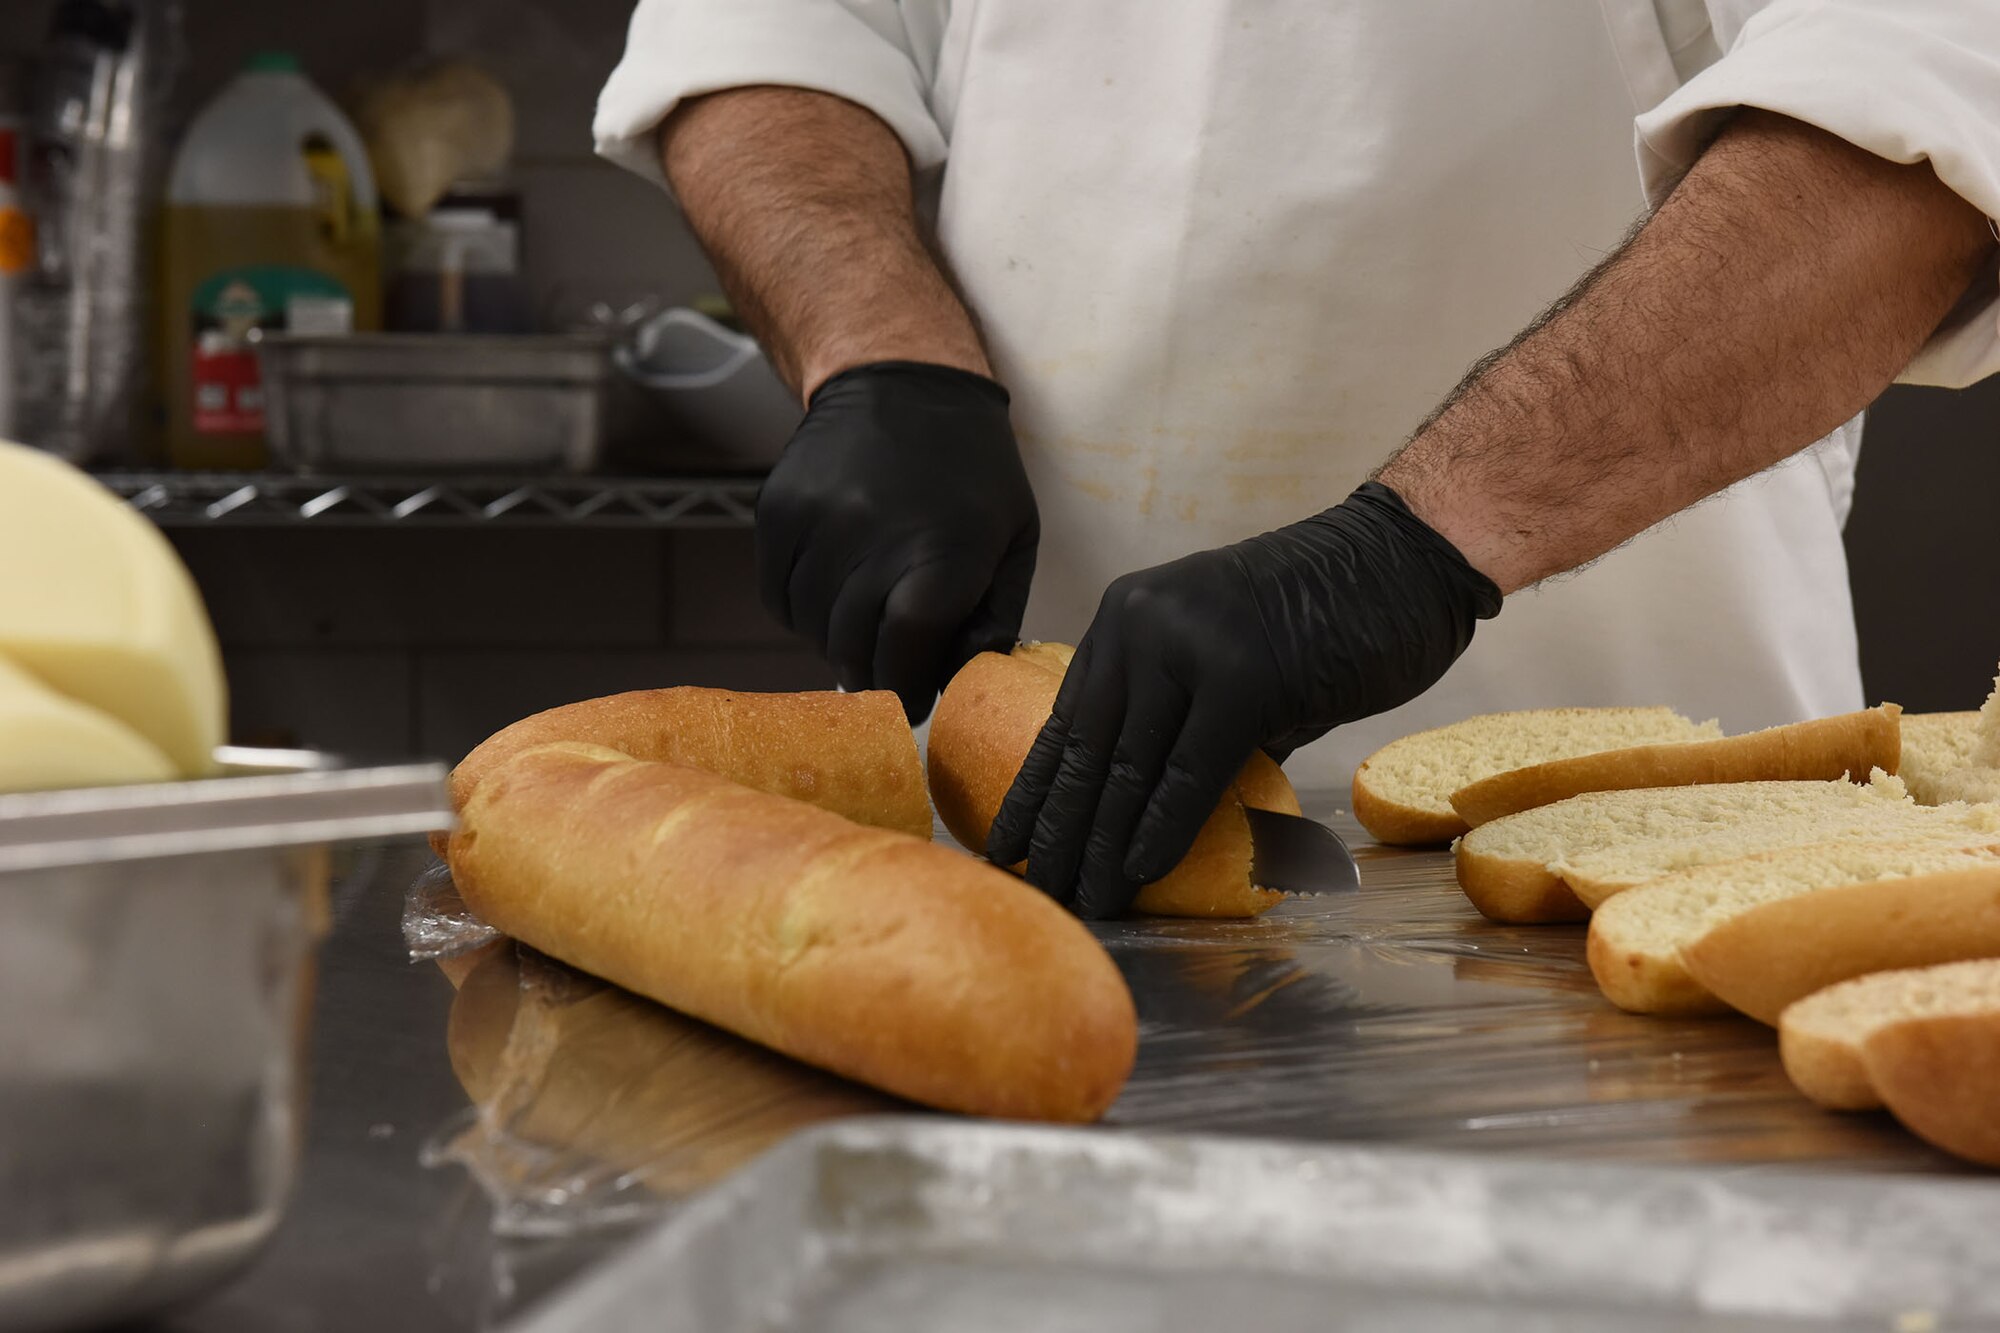 Don Paulos, Elkhorn Dining Facility chef, slices bread in preparation for the lunch hour, Dec. 1, 2020, at Malmstrom Air Force Base, Mont. Chefs and Airmen work together in the kitchen to prepare the most quality and healthy options available for mission success. (U.S. Air Force photo by Airman Elijah Van Zandt)